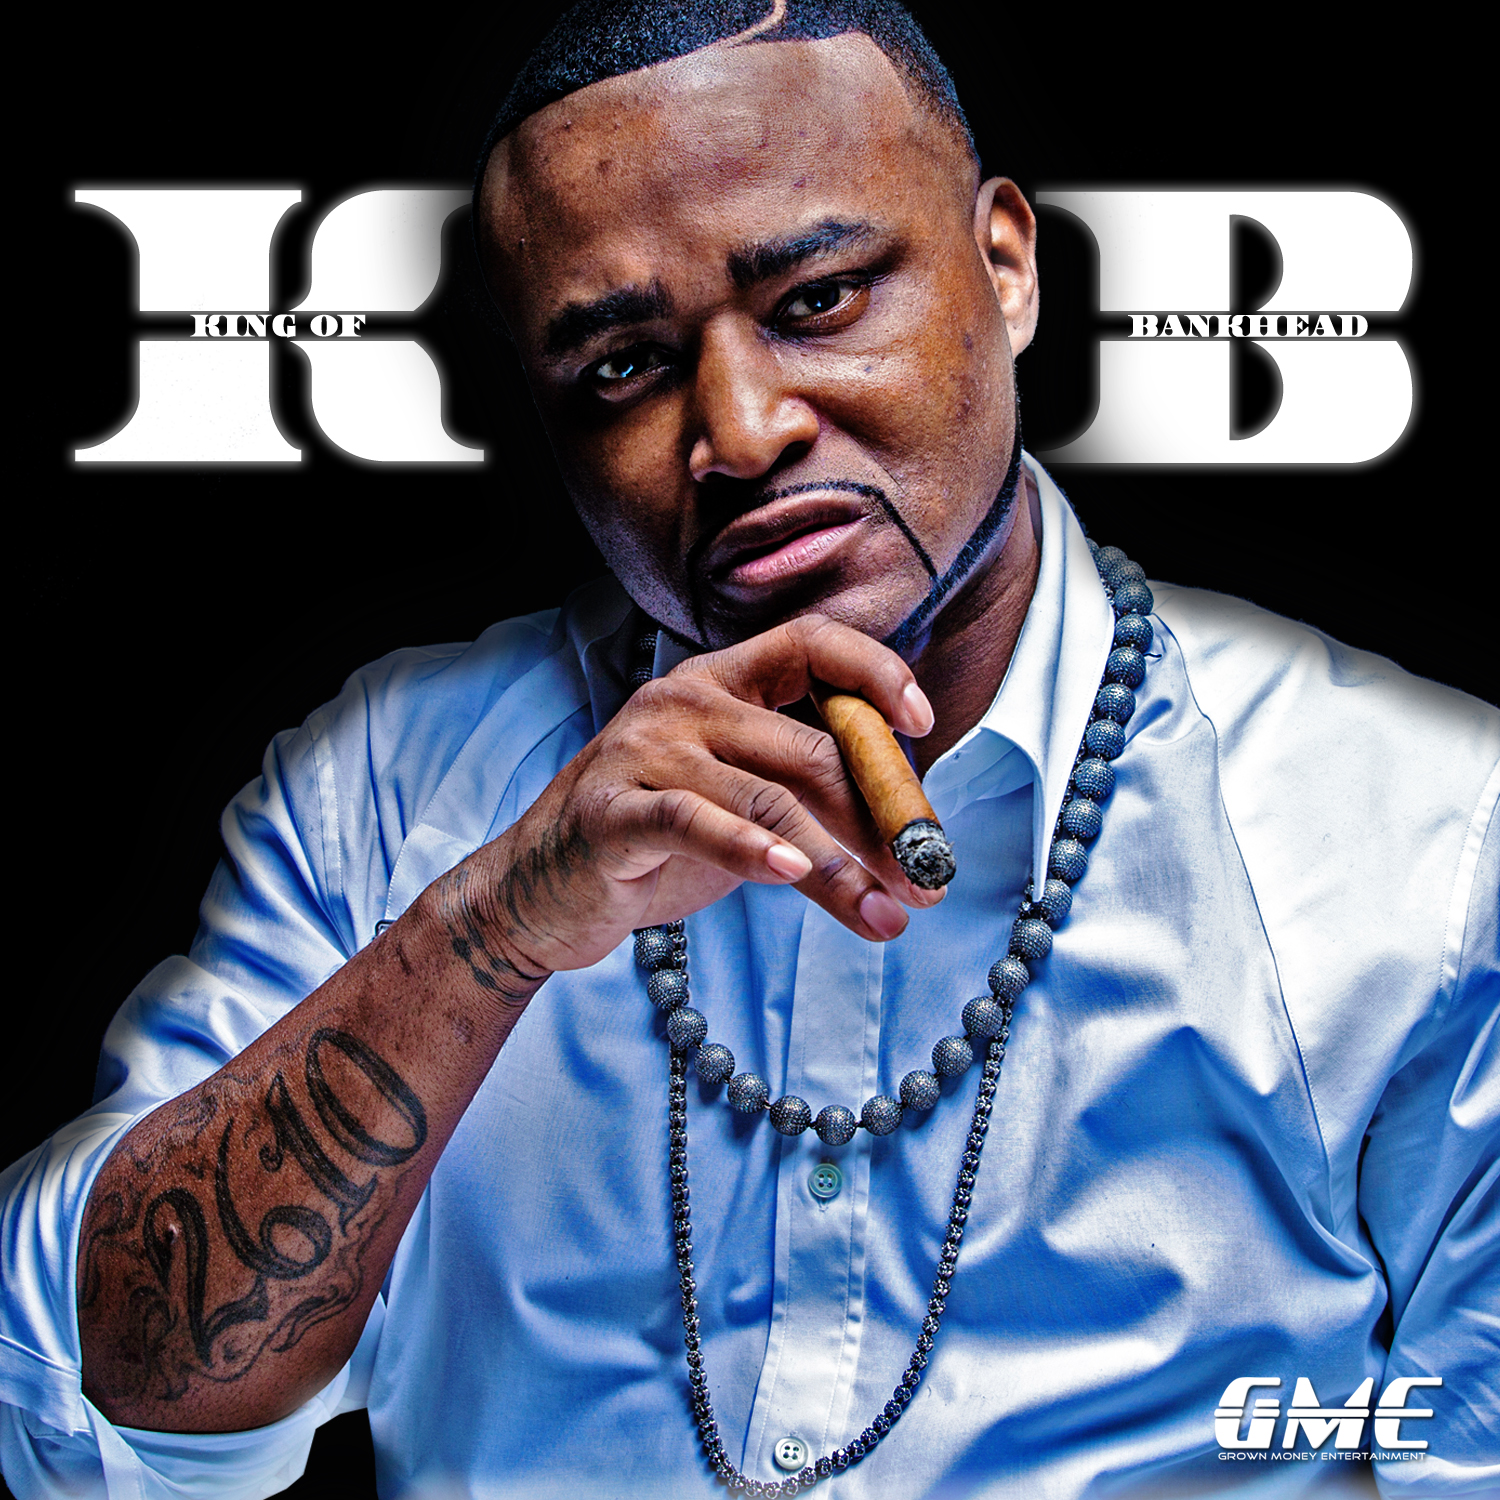 The Best Of Shawty Lo (The King Of Bankhead) by Shawty Lo: Listen